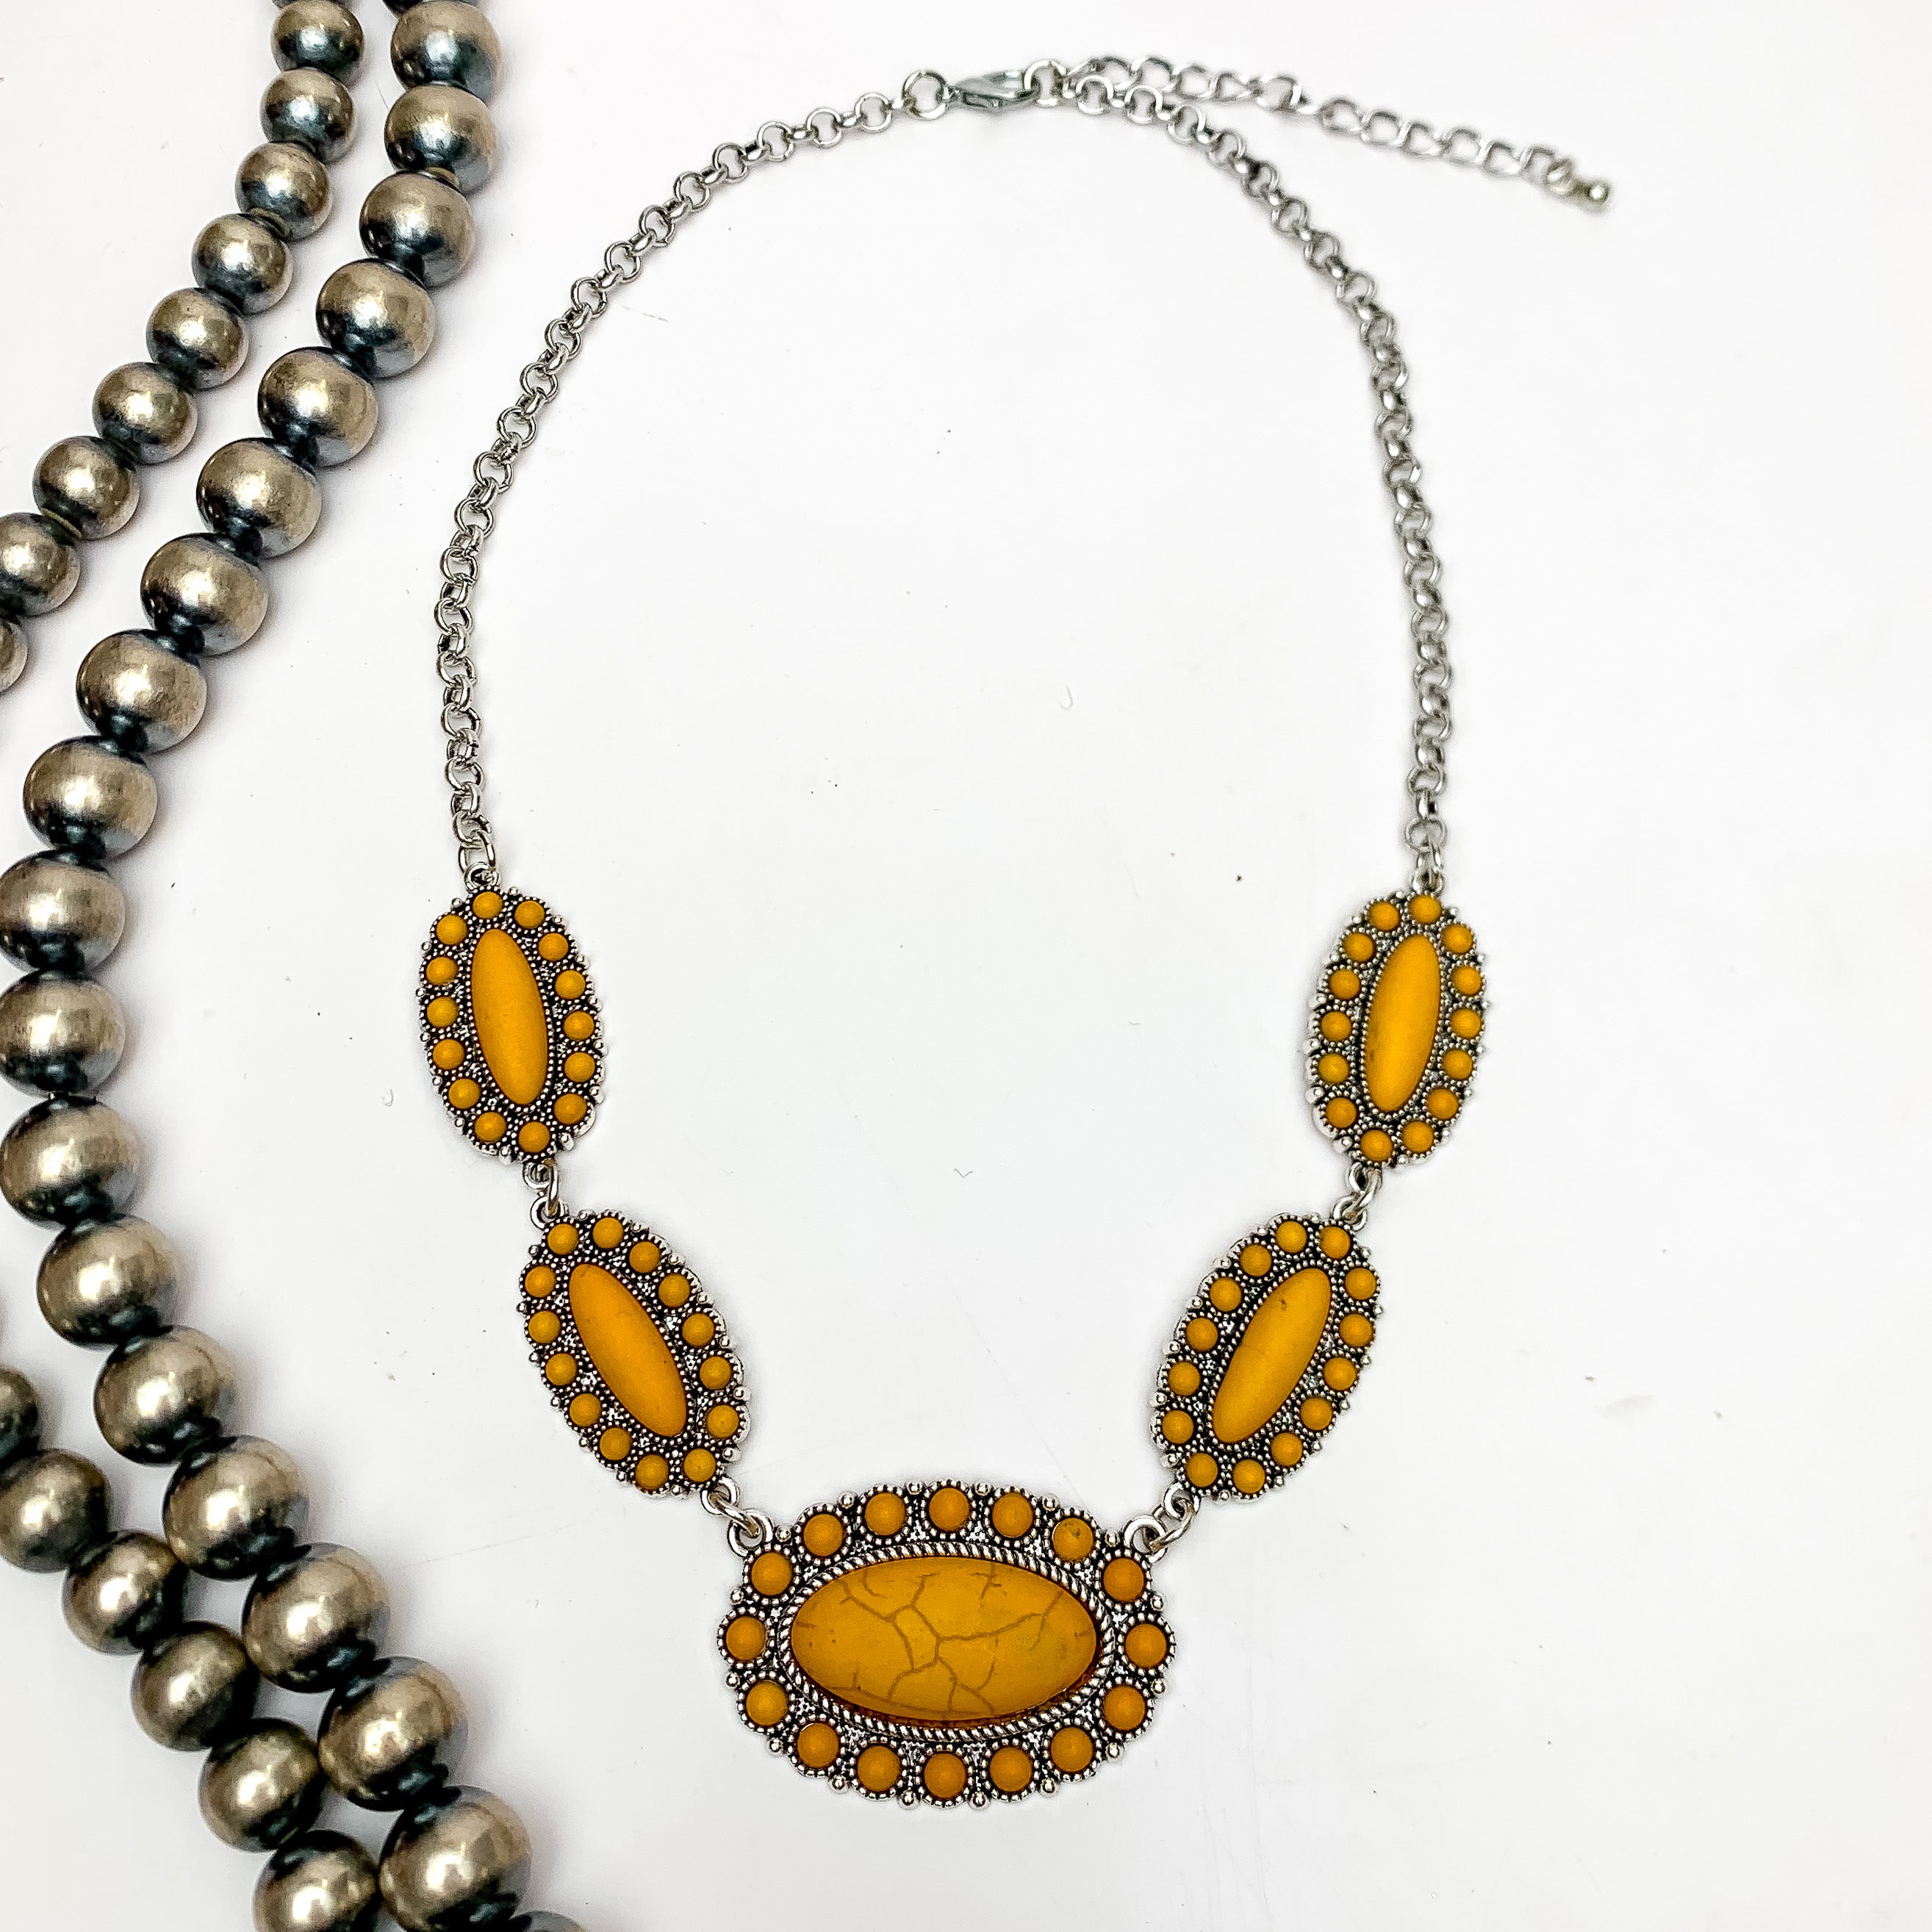 Western Silver Tone Necklace in Yellow. This necklace is on a white background with Navajo pearls on the left.